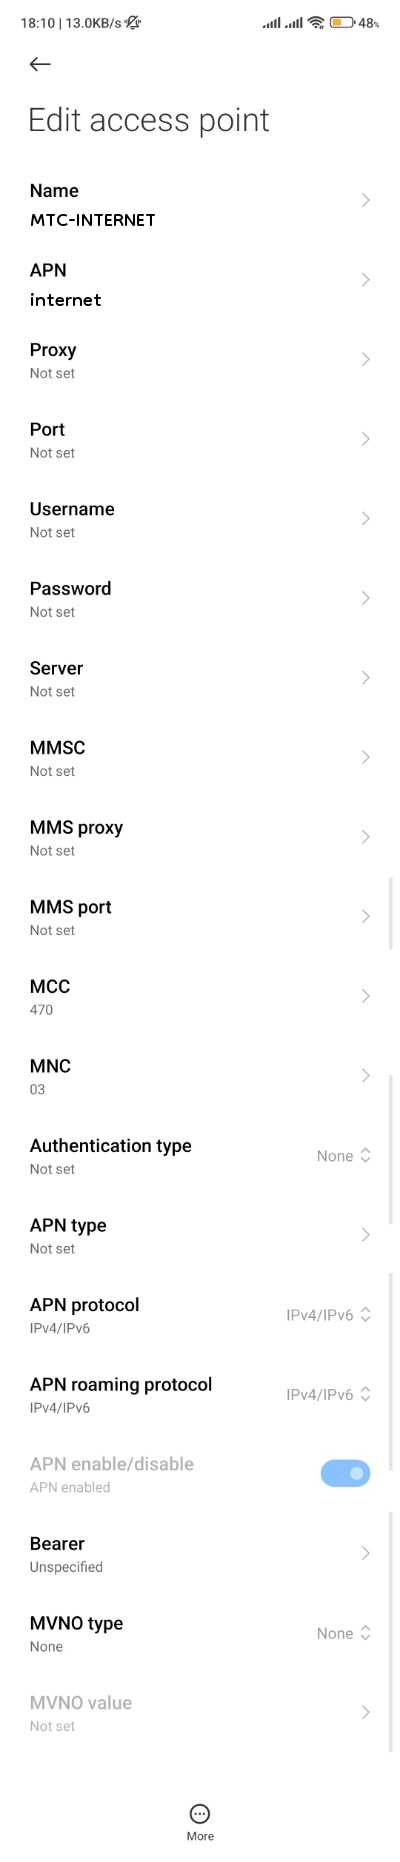 MTC APN Setiings for Android iPhone 3G 4G Internet